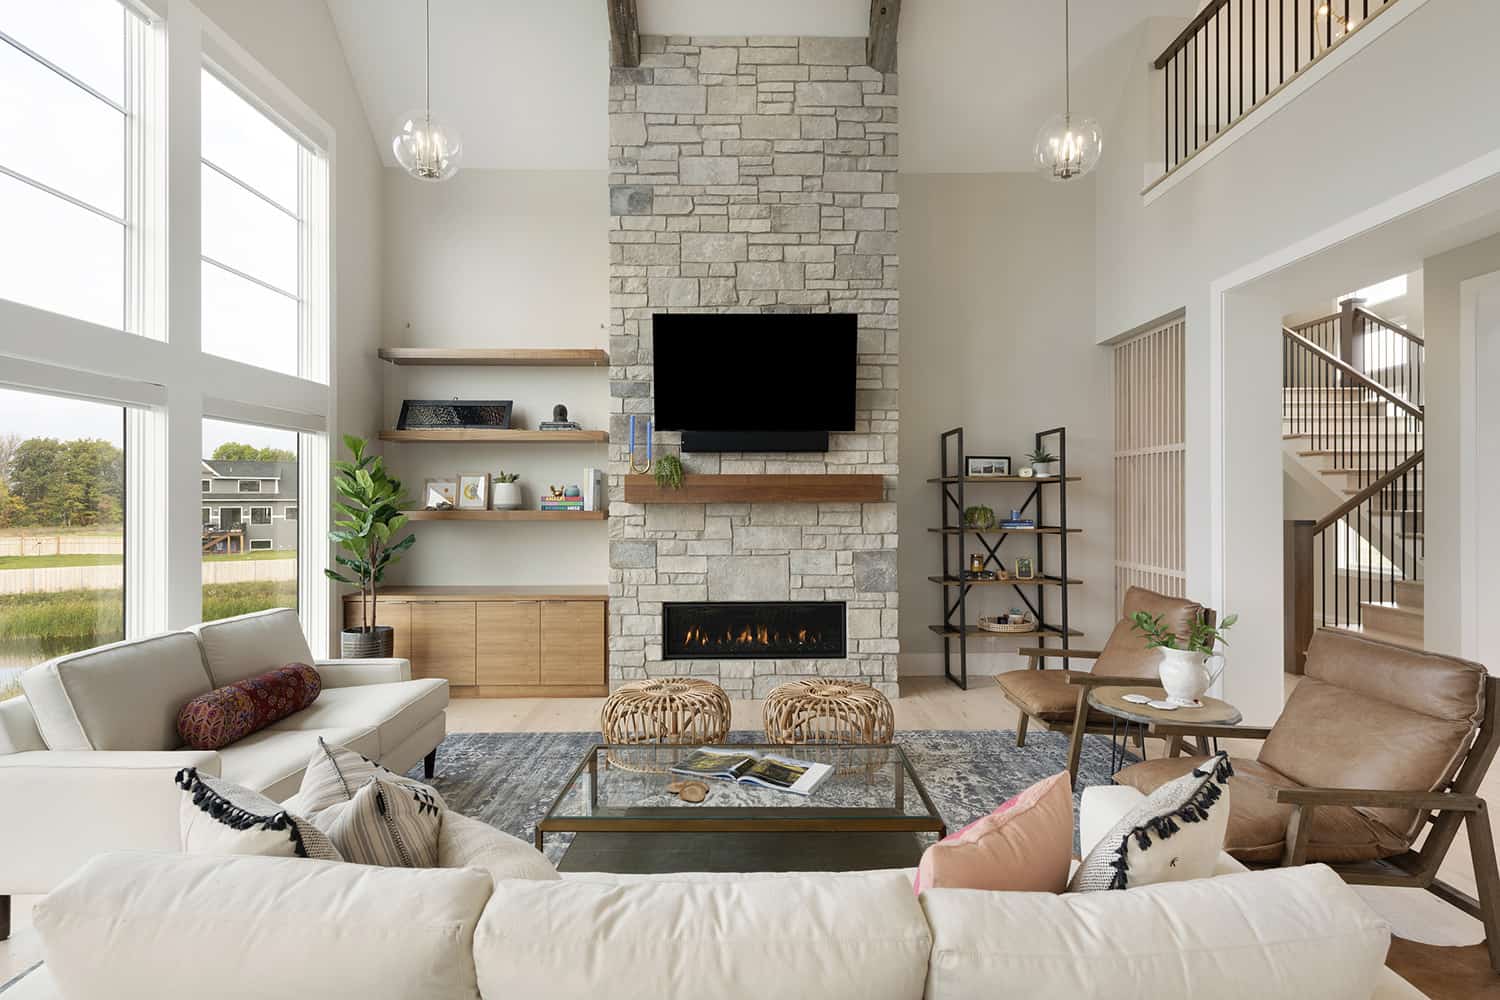  prairie-transitional-style-living-room